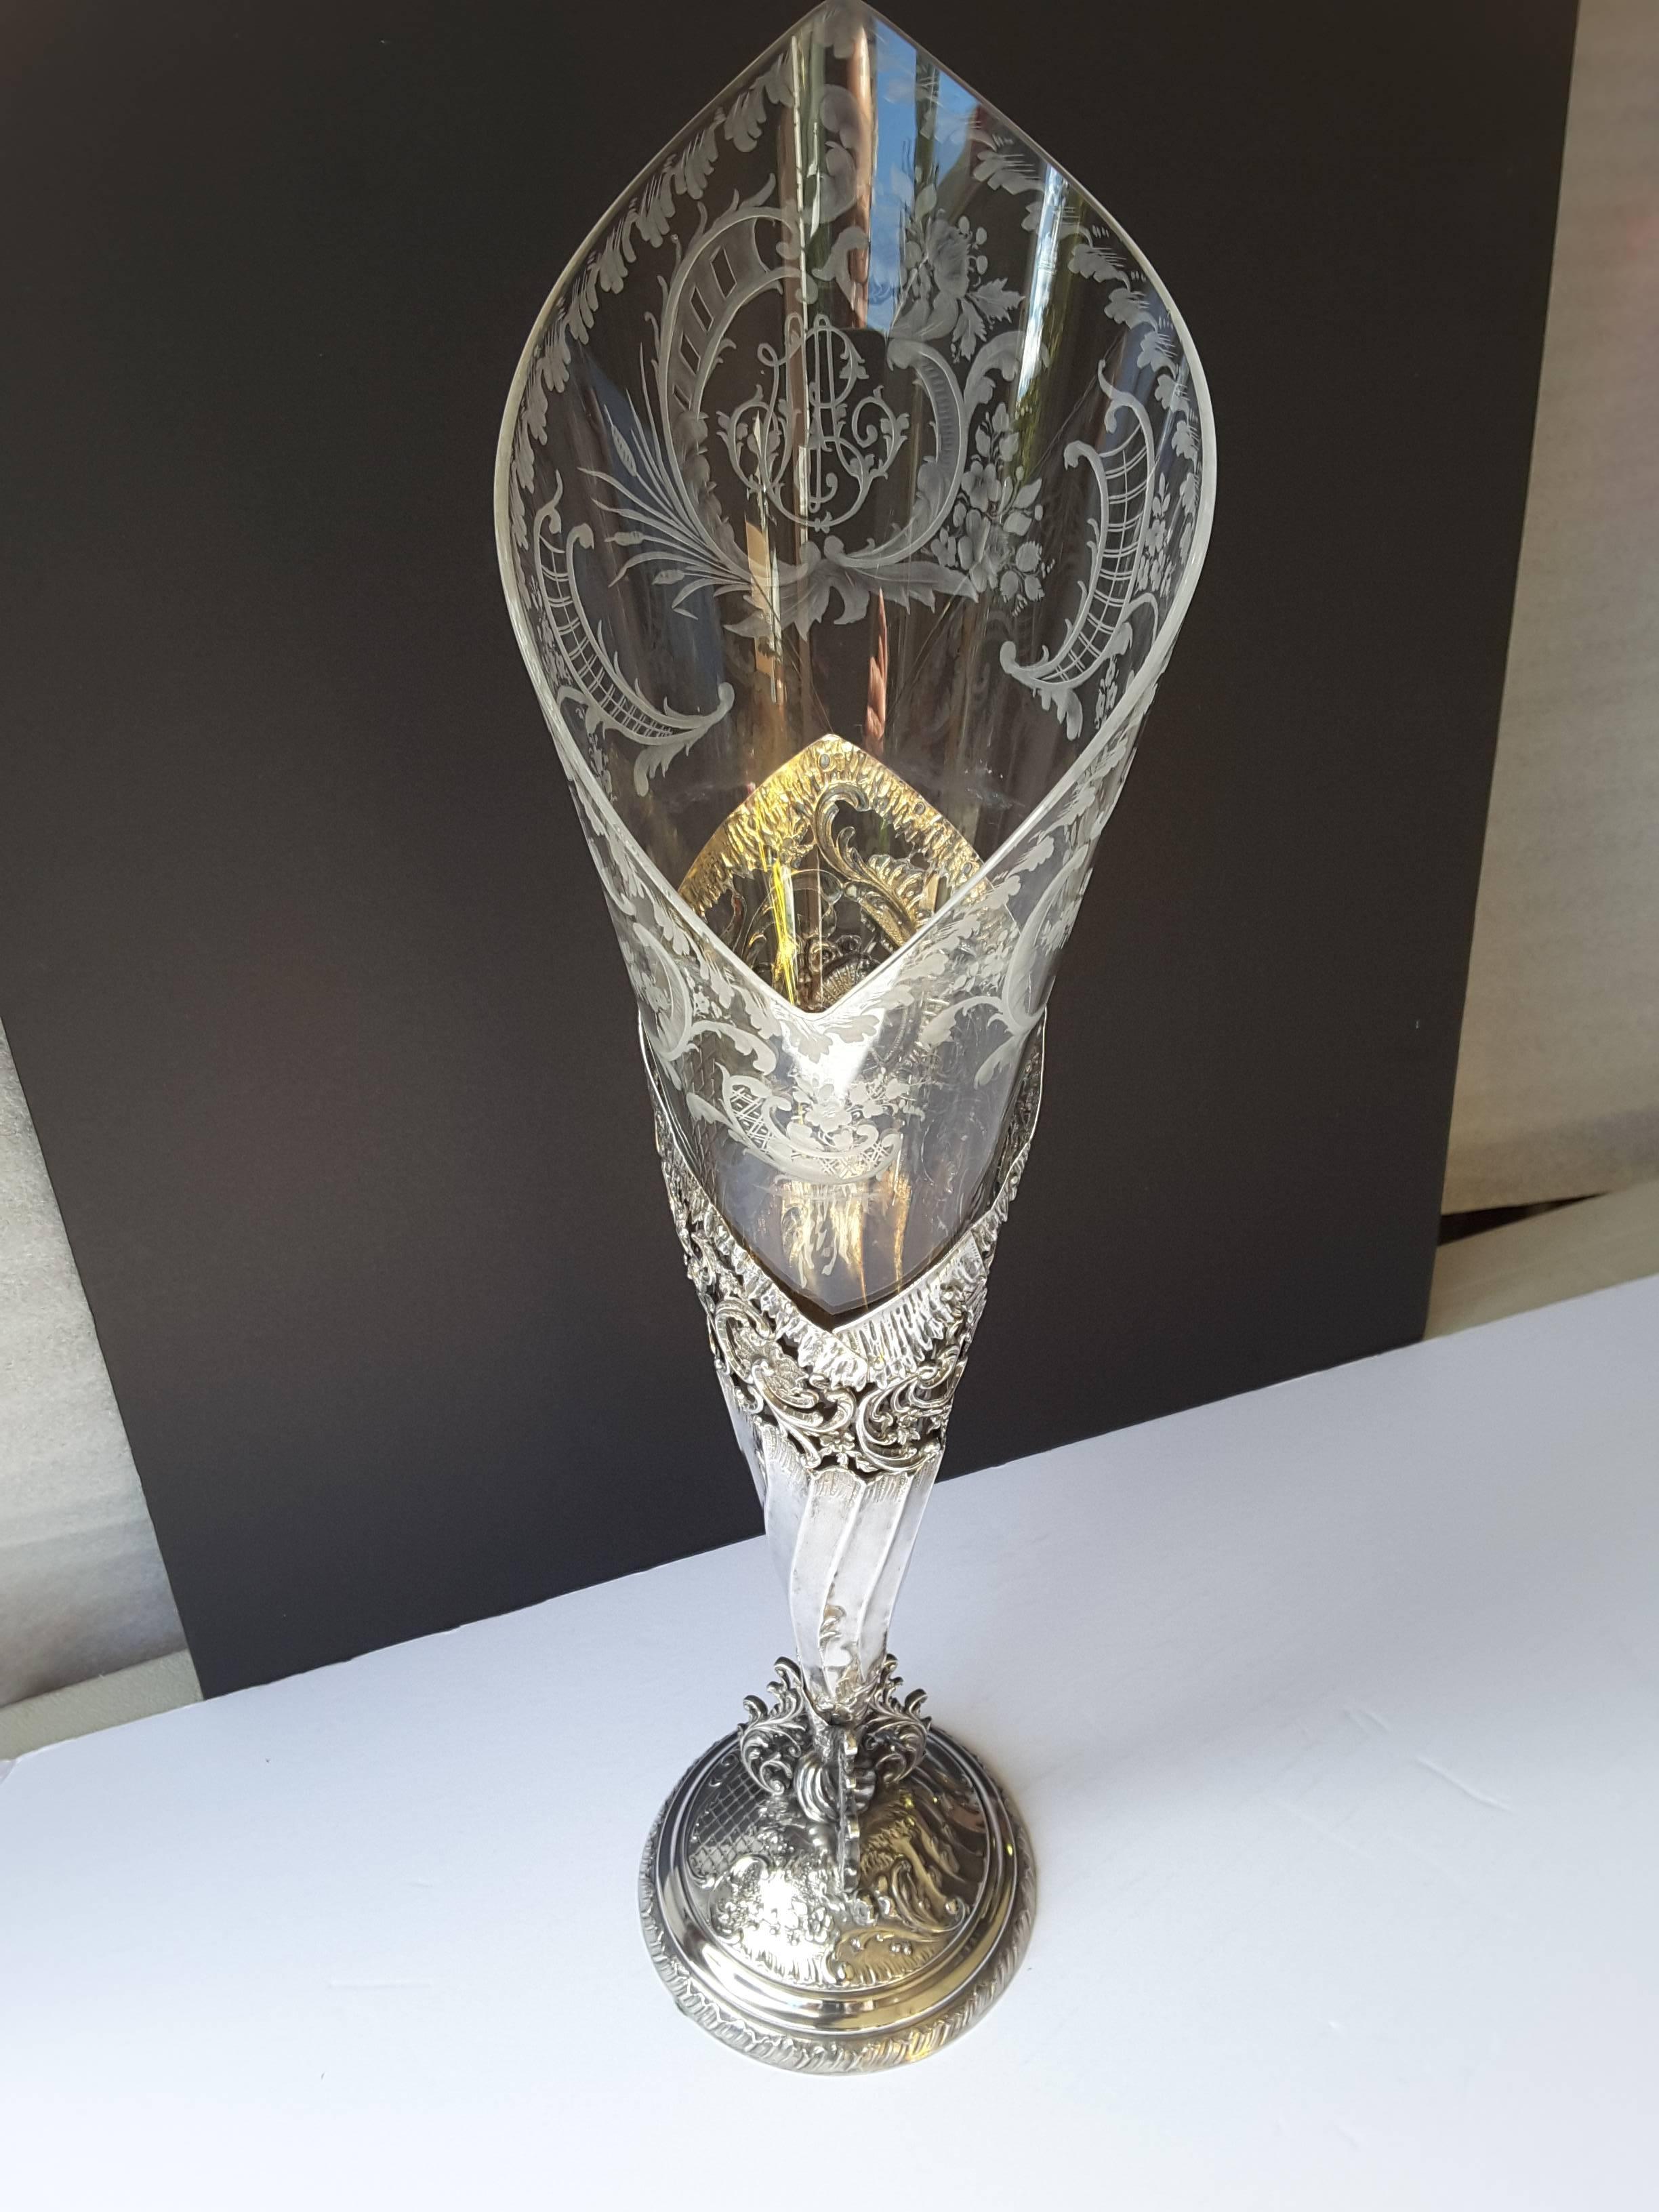 French antique silver trumpet/epergne vase cut-glass wheel cut insert, circa 1900. The base is .800 sterling silver with a wheel cut decorated glass insert with vines and floral decoration, the glass is in Perfect condition with no chips or cracks.